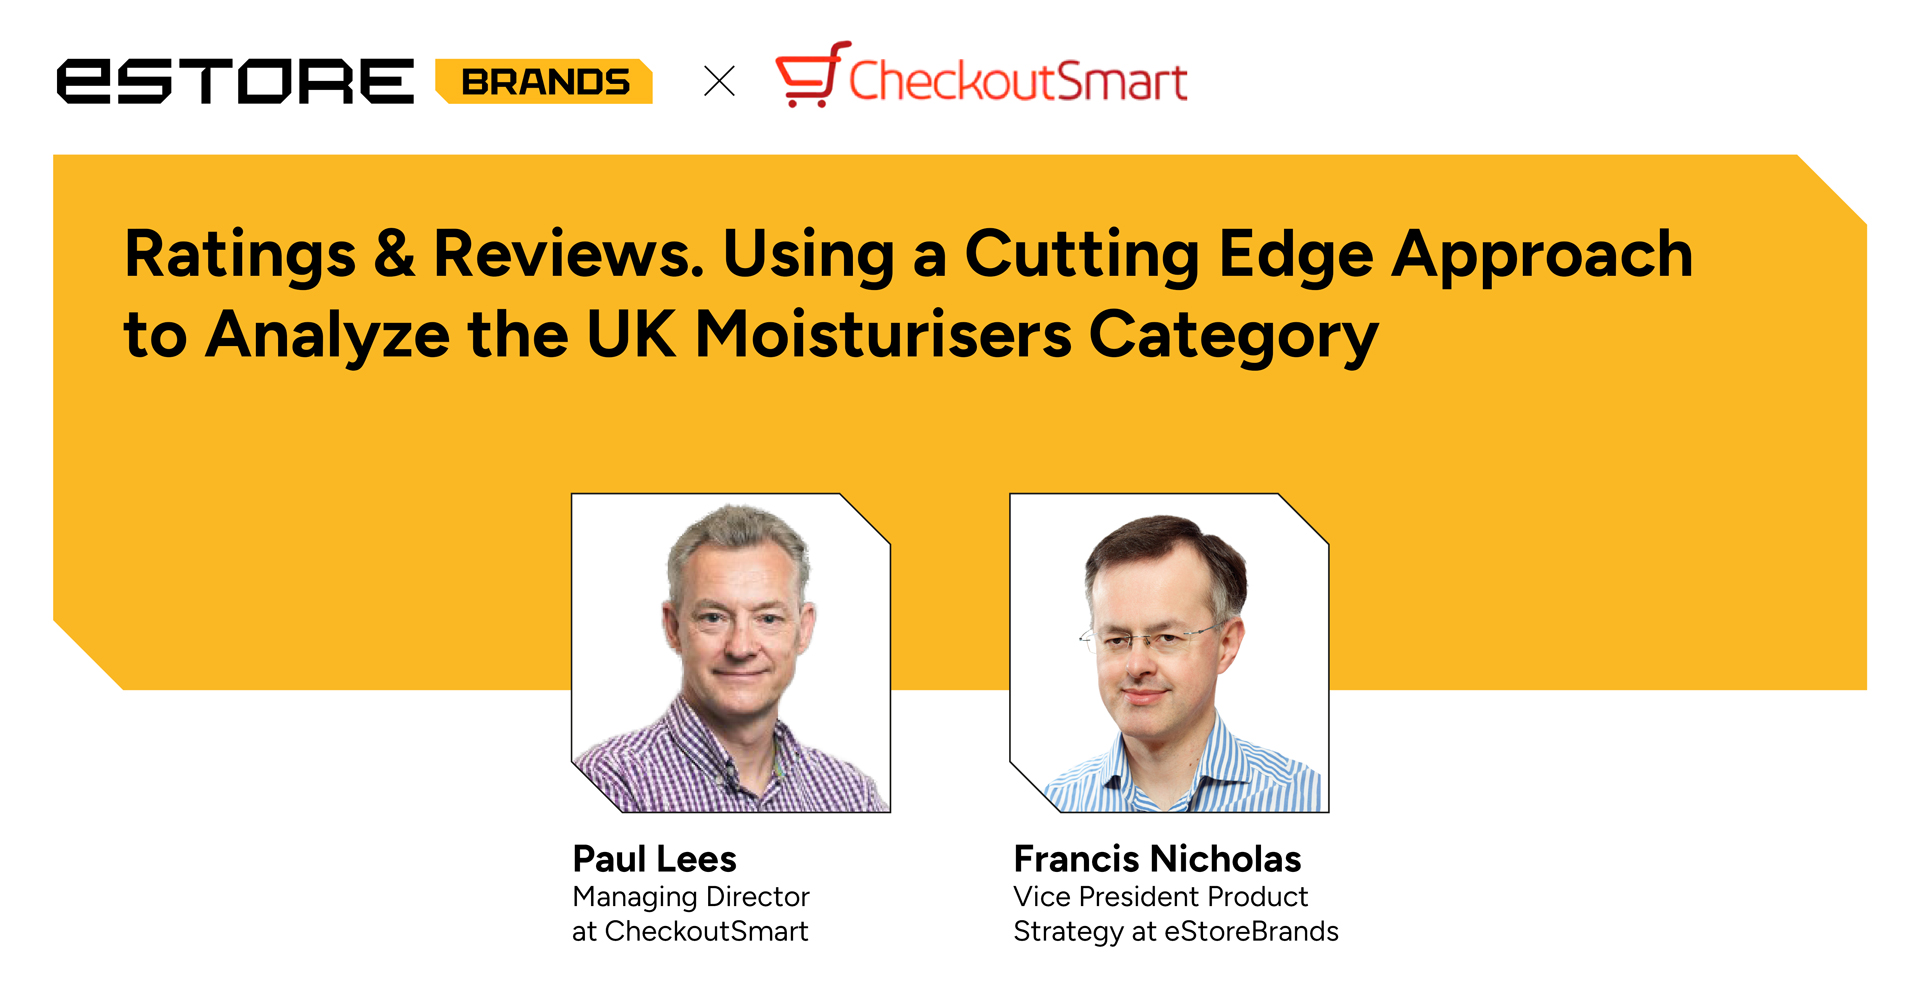 Webinar - Ratings & Reviews. Using Cutting Edge Approach to Analyze the UK Moisturisers Category